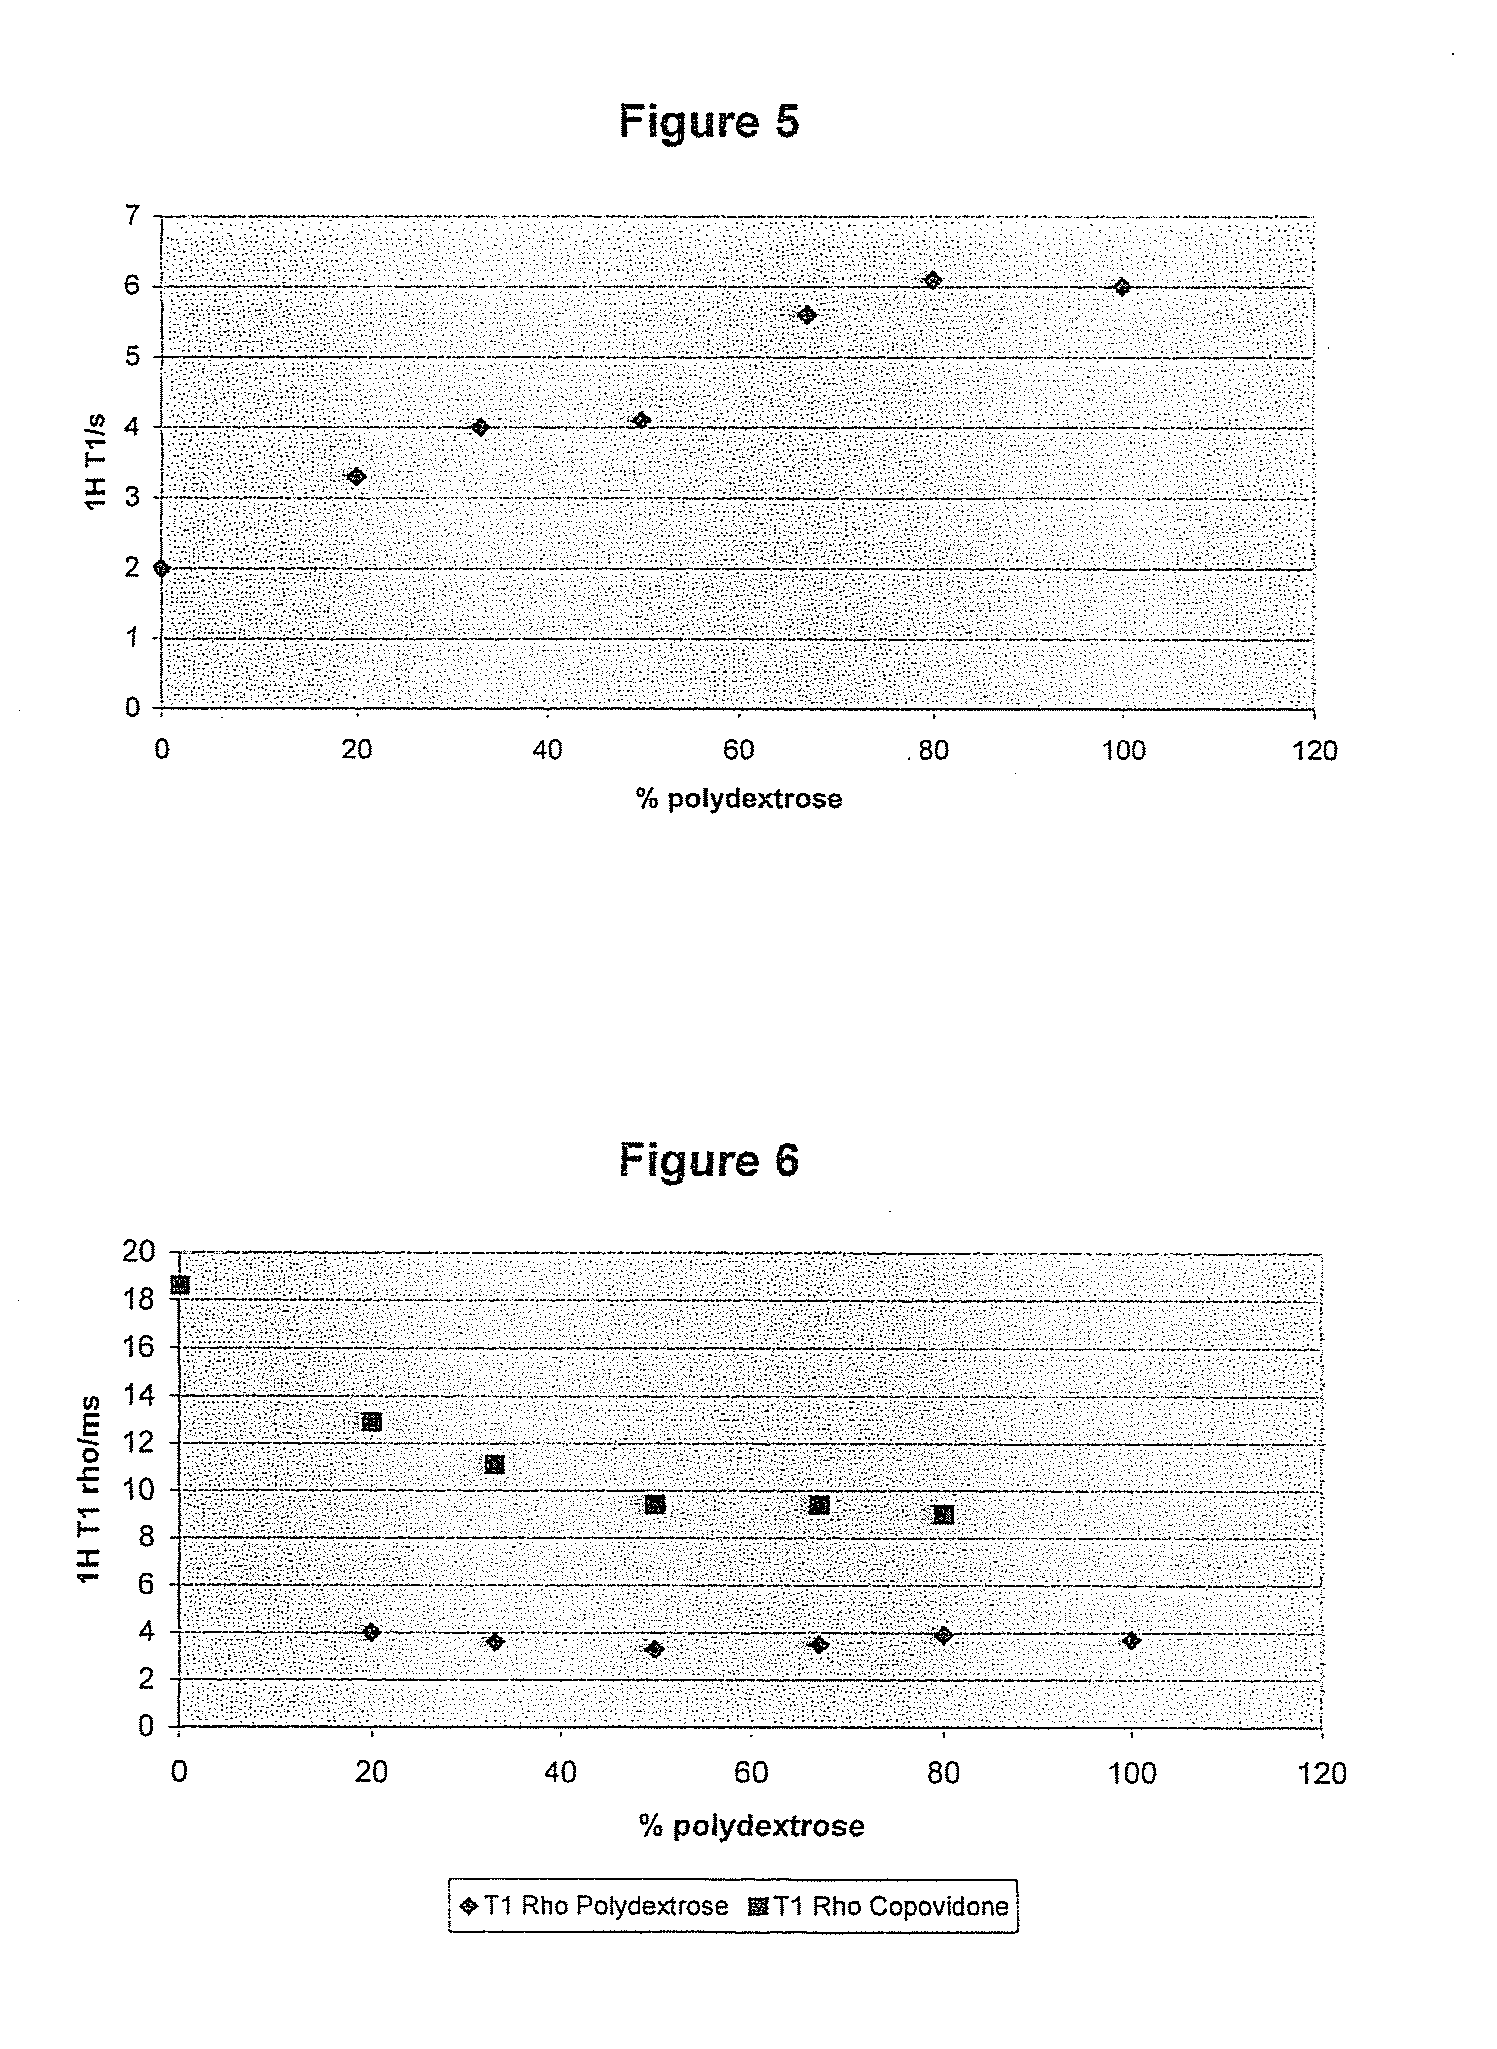 Pharmaceutical composition comprising a solid dispersion with a polymer matrix containing a continuous polydextrose phase and a continuous phase of a polymer other than polydextrose